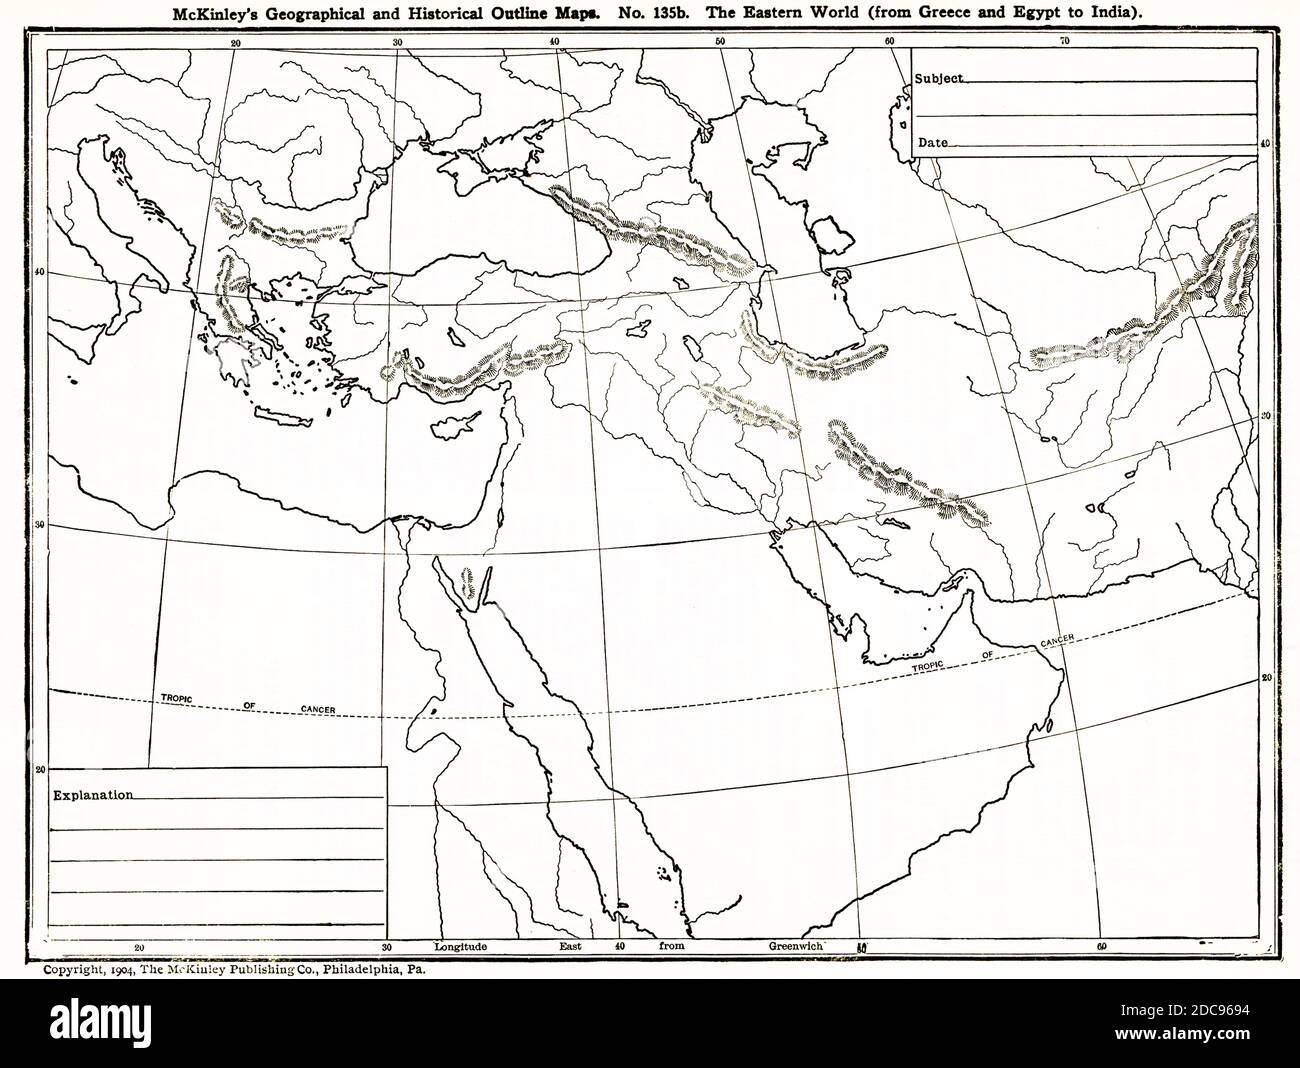 This geographical and historical outline map shows the Eastern world from Greece to Egypt to India. Stock Photo